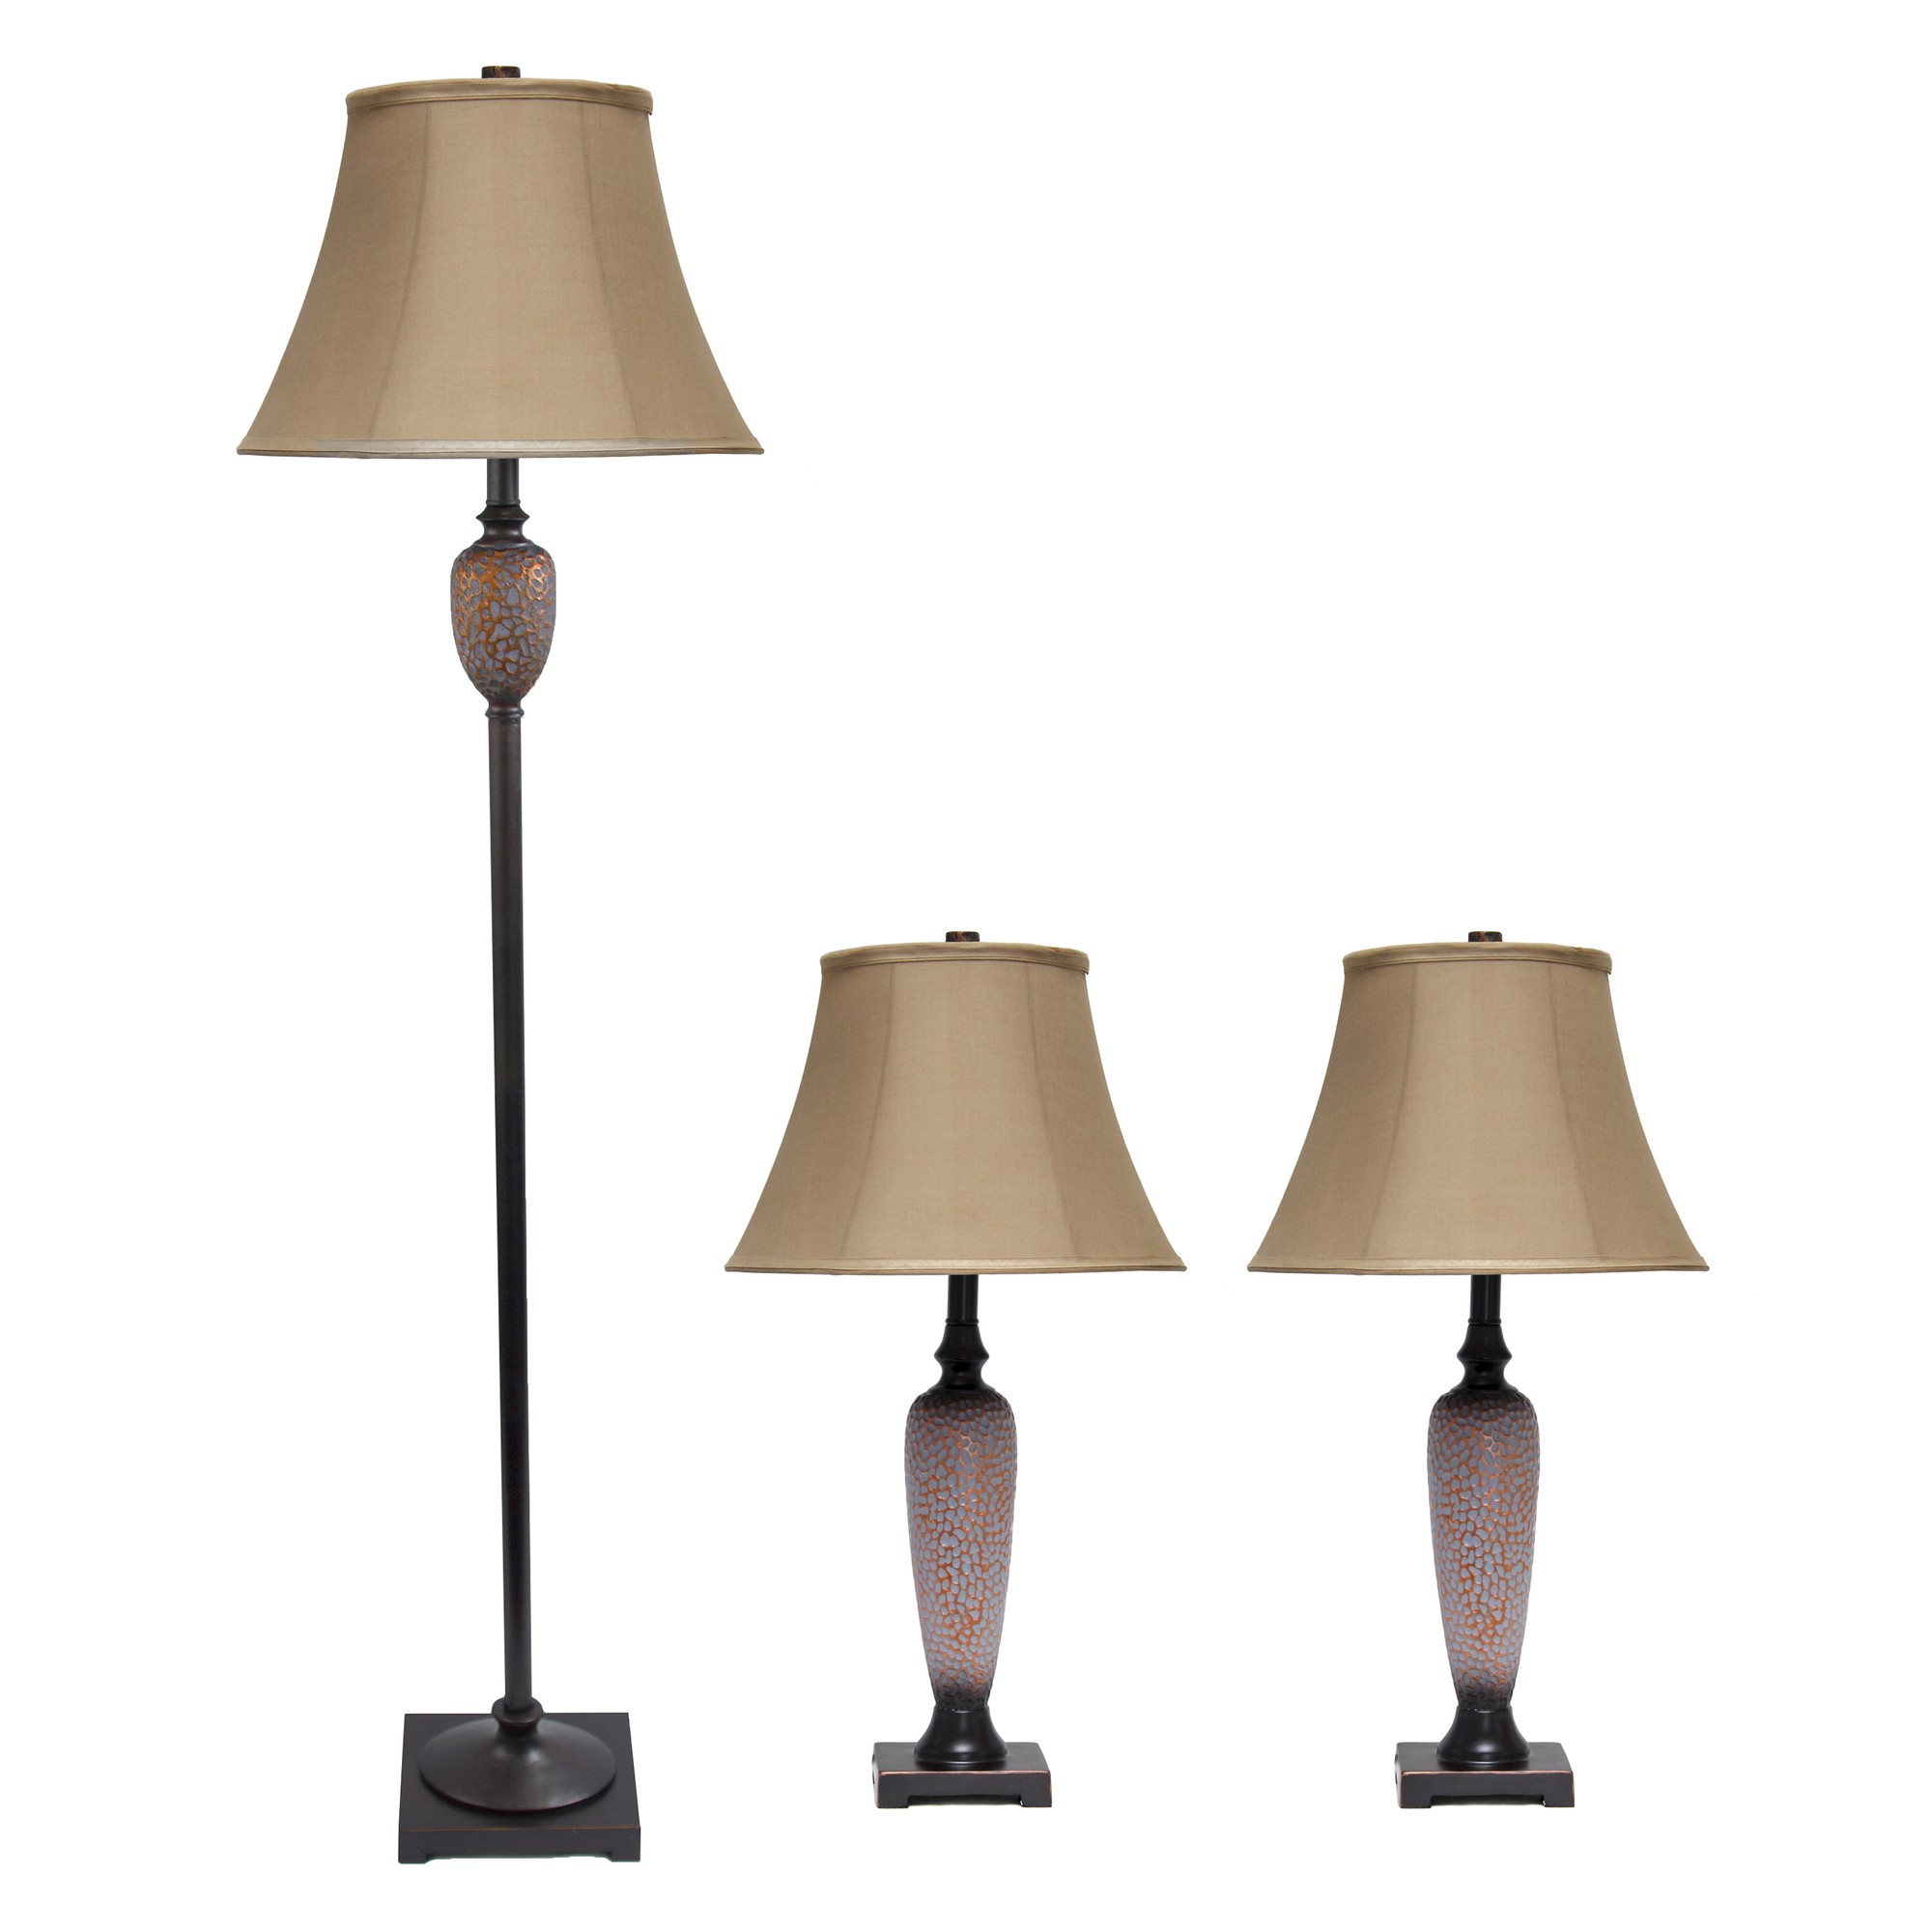 Lalia Home 3 Piece Metal Lamp Set (2 Table Lamps, 1 Floor Lamp) Light Brown Empire Fabric Shades and Hammered Bronze Finish